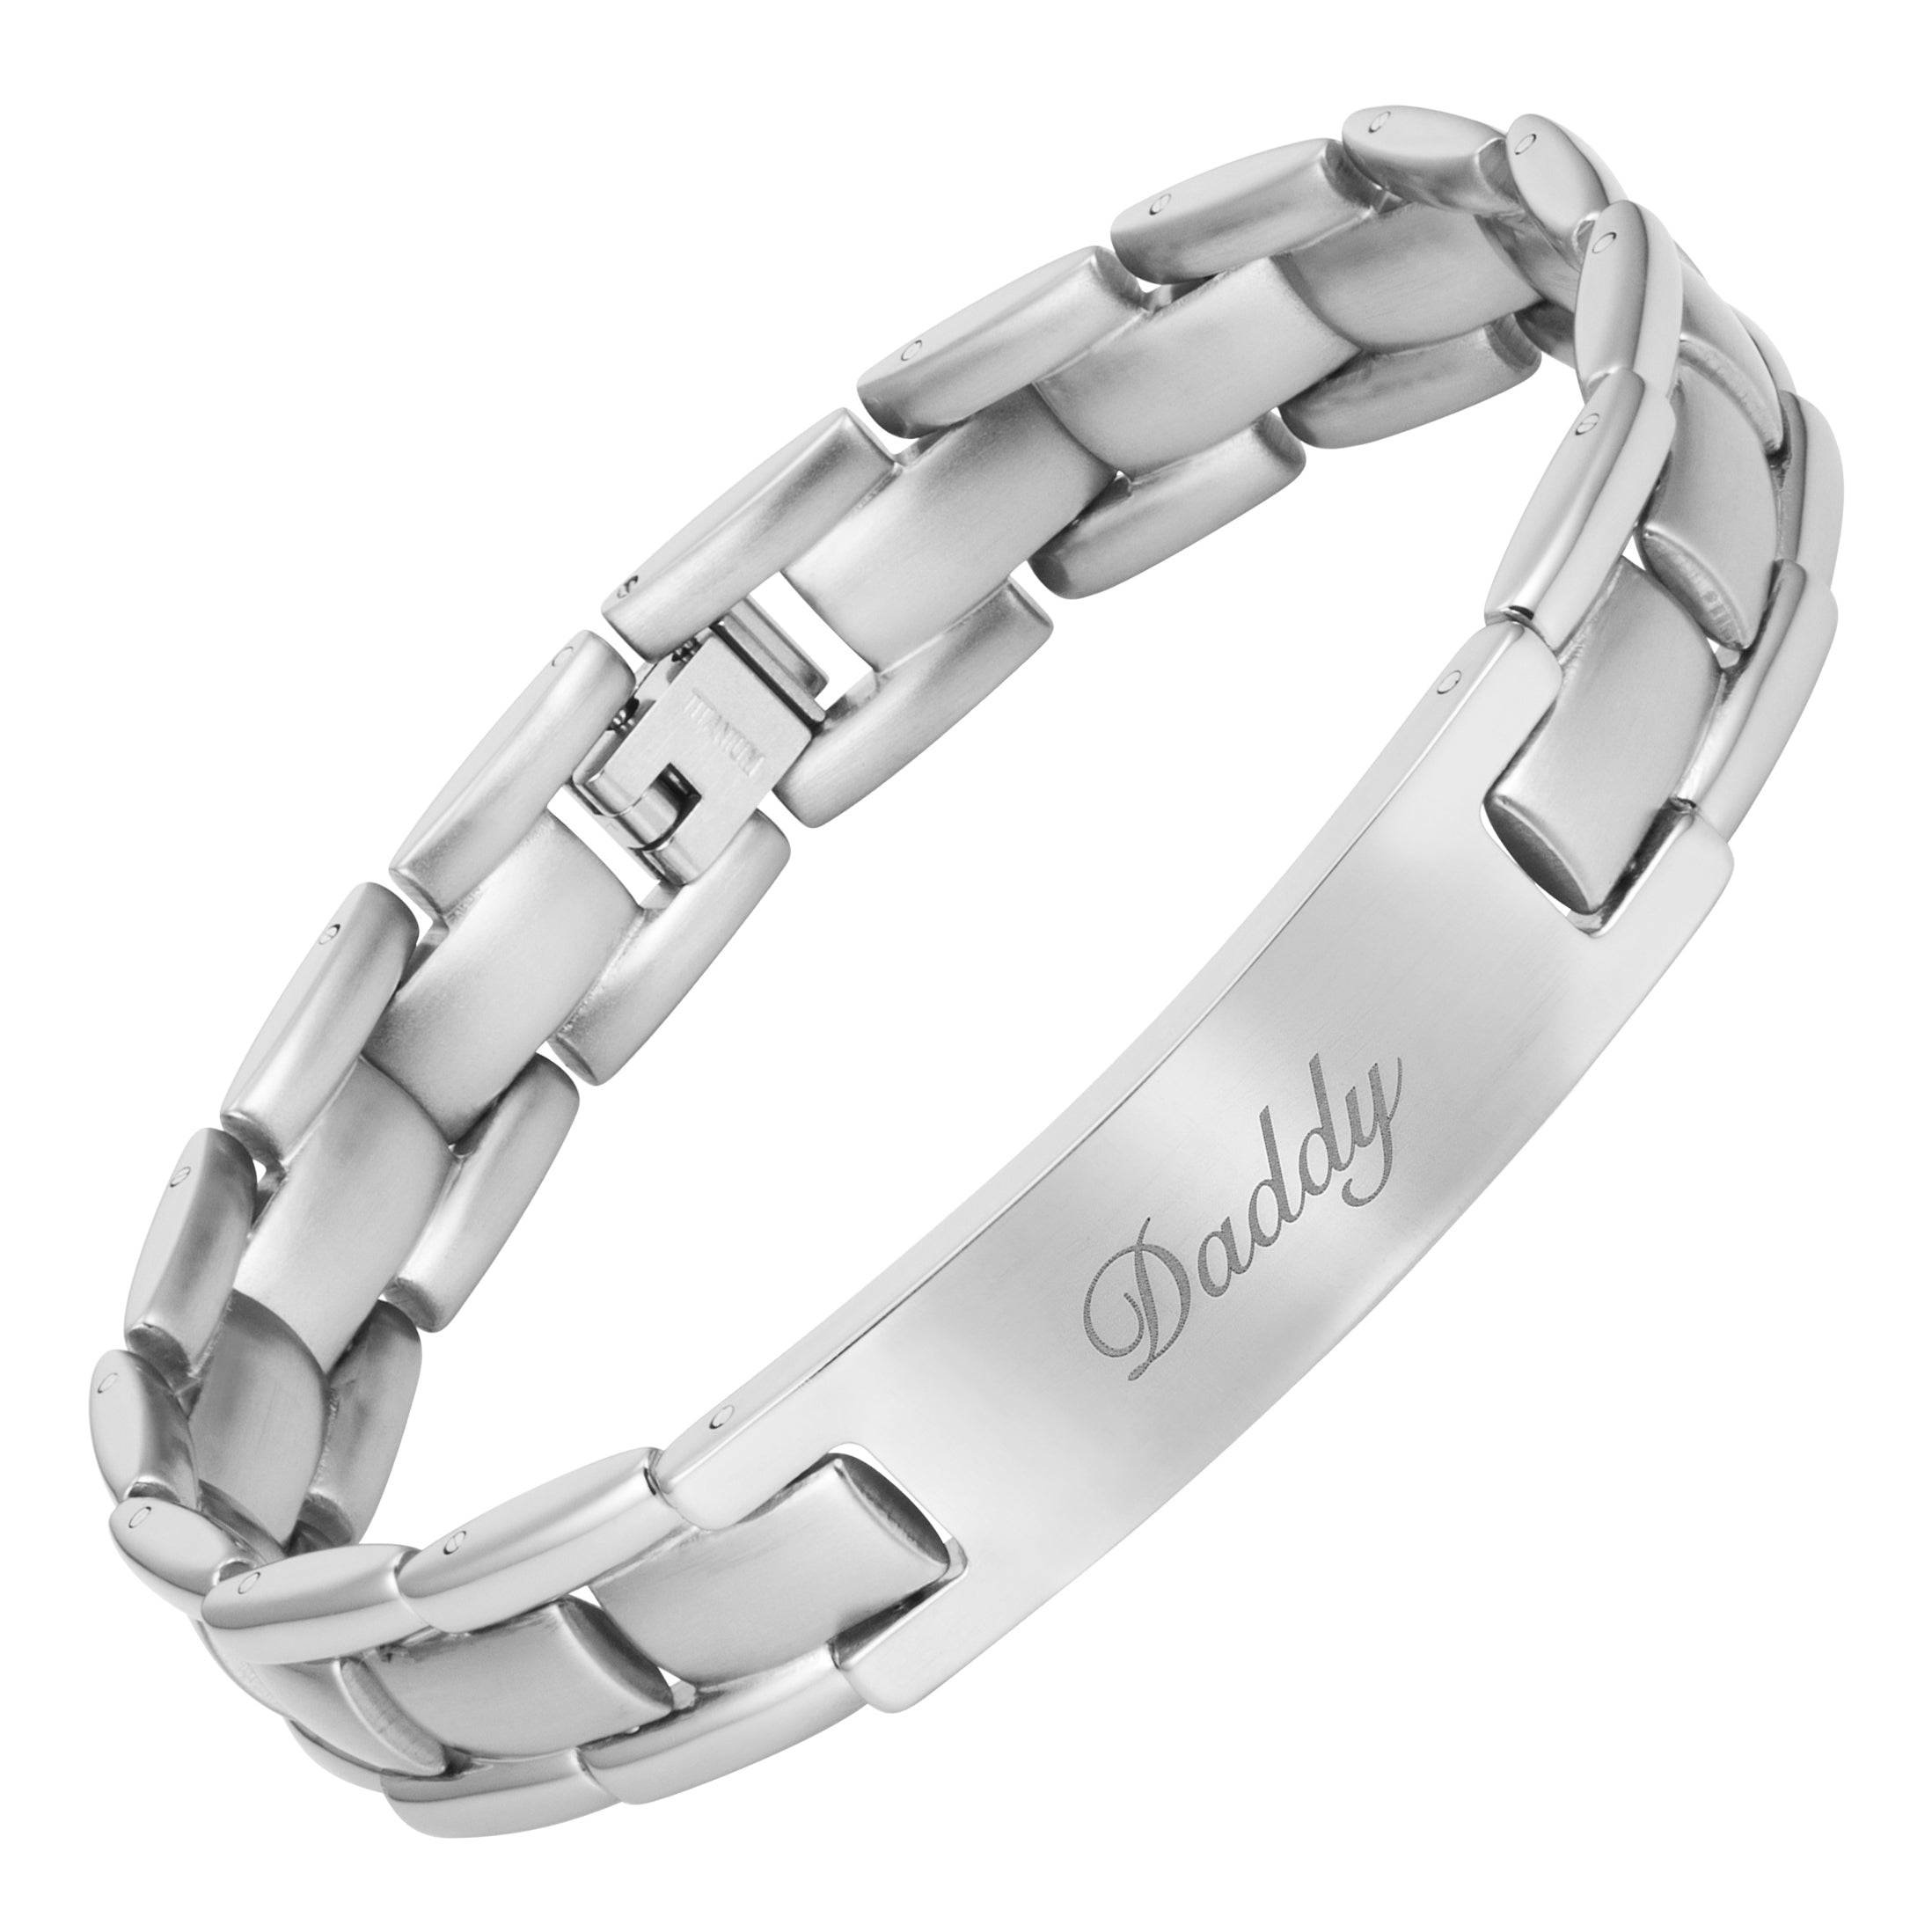 DADDY Mens Titanium Bracelet Etched With Love You Daddy